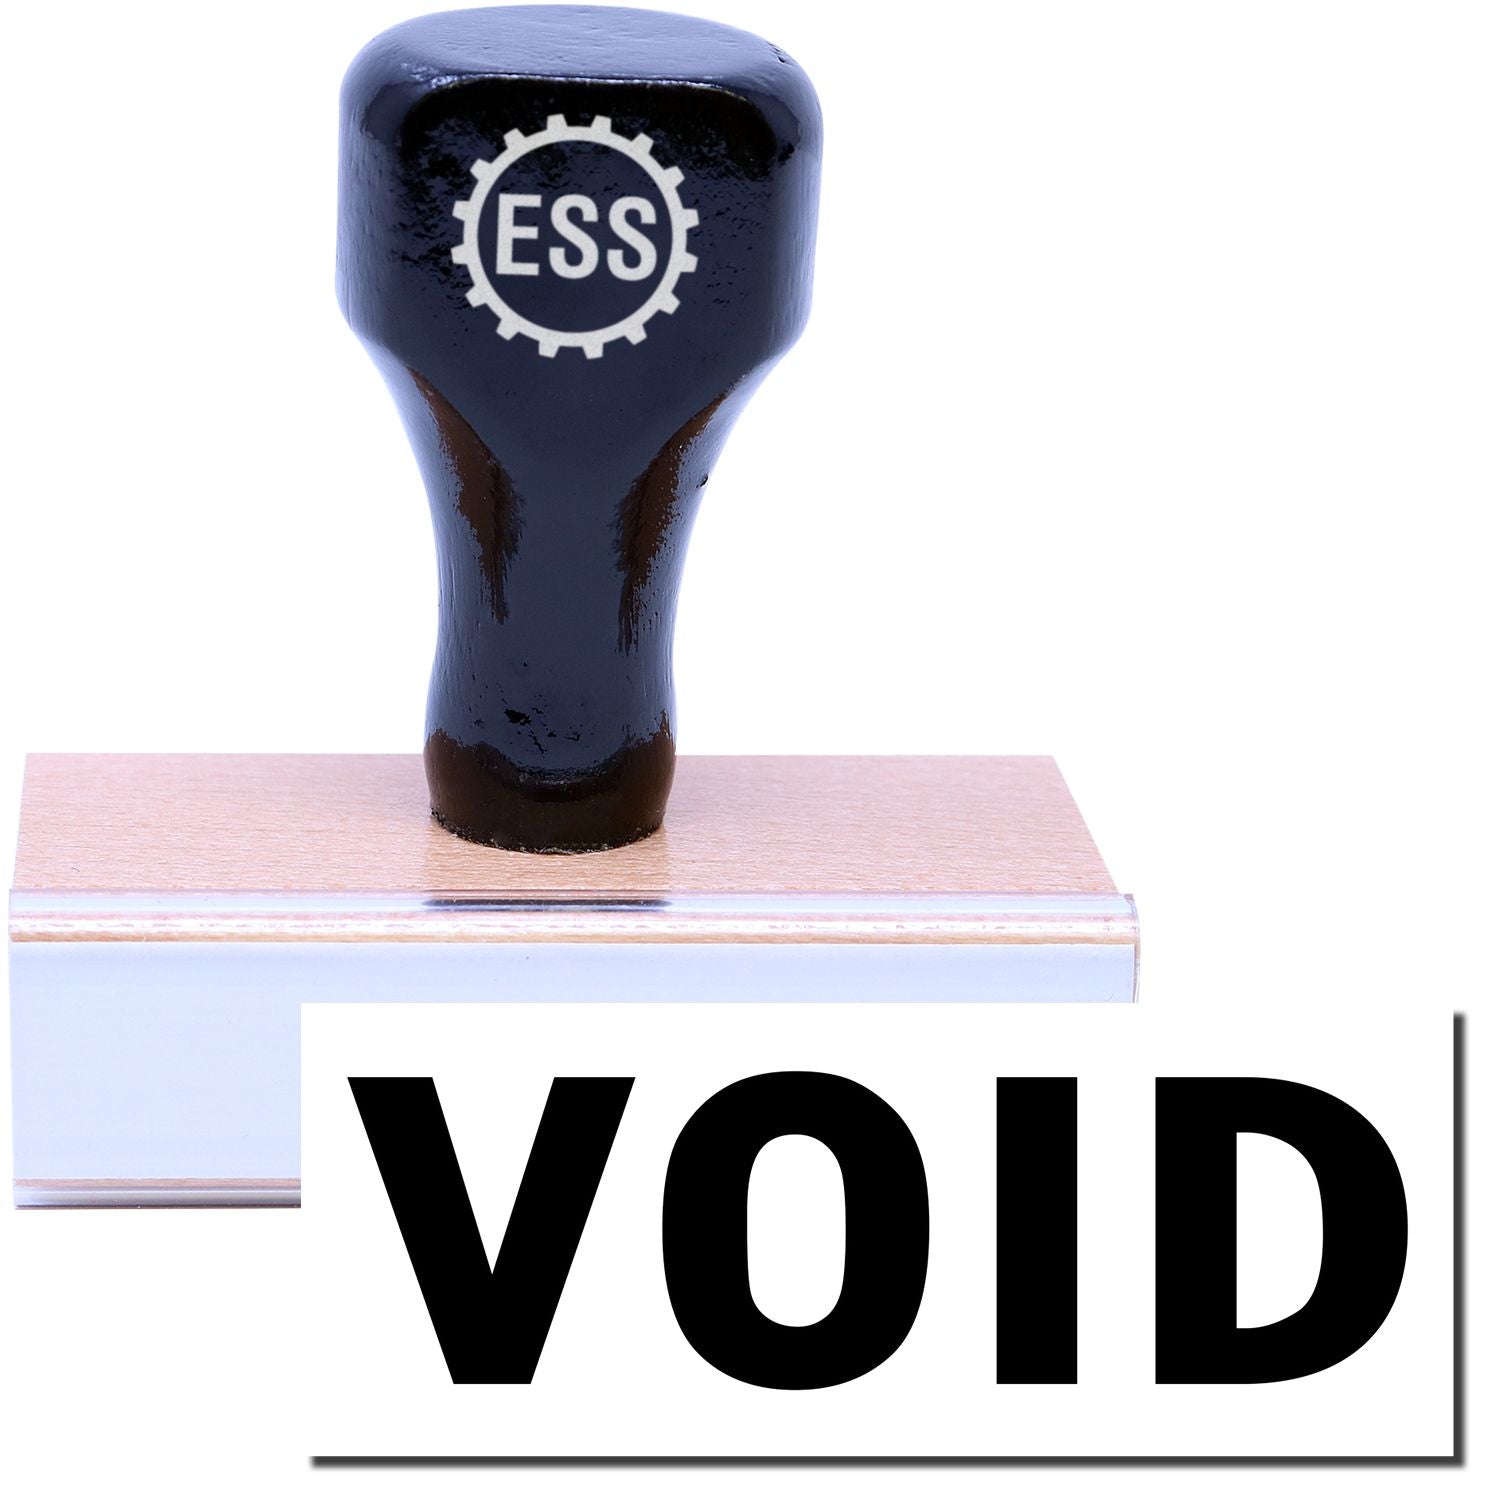 A stock office rubber stamp with a stamped image showing how the text "VOID" in a large font is displayed after stamping.